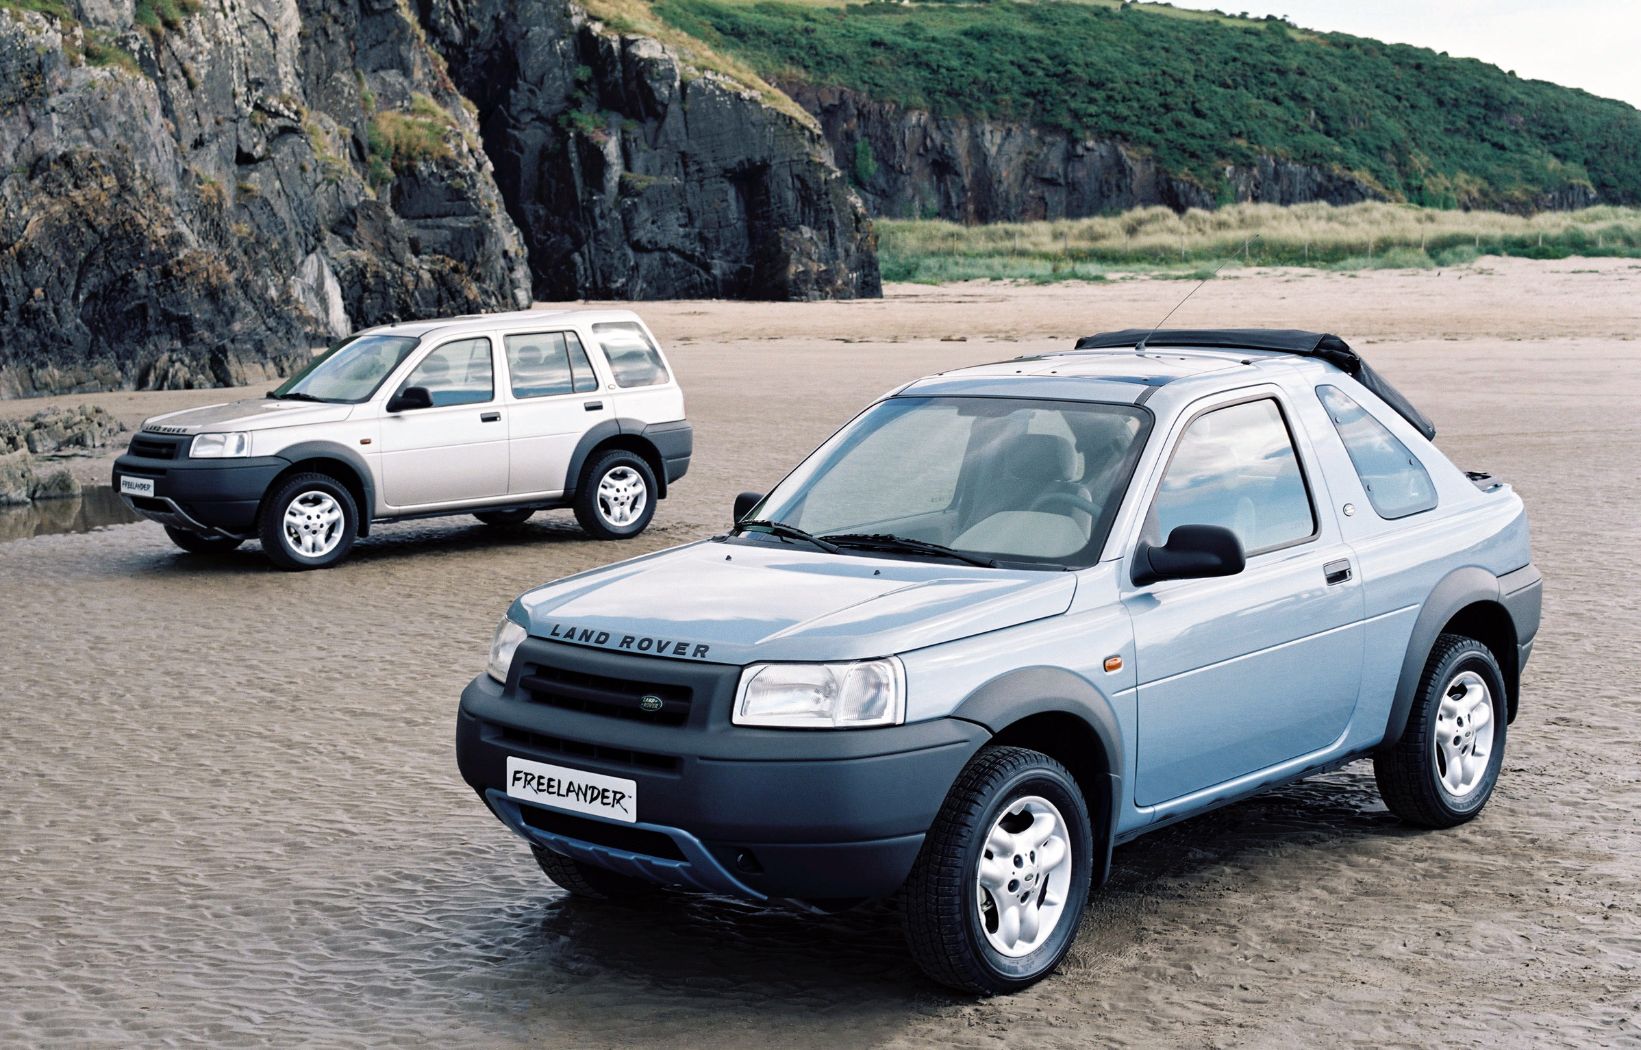 How the Reshaped Land Rover's Product Range -